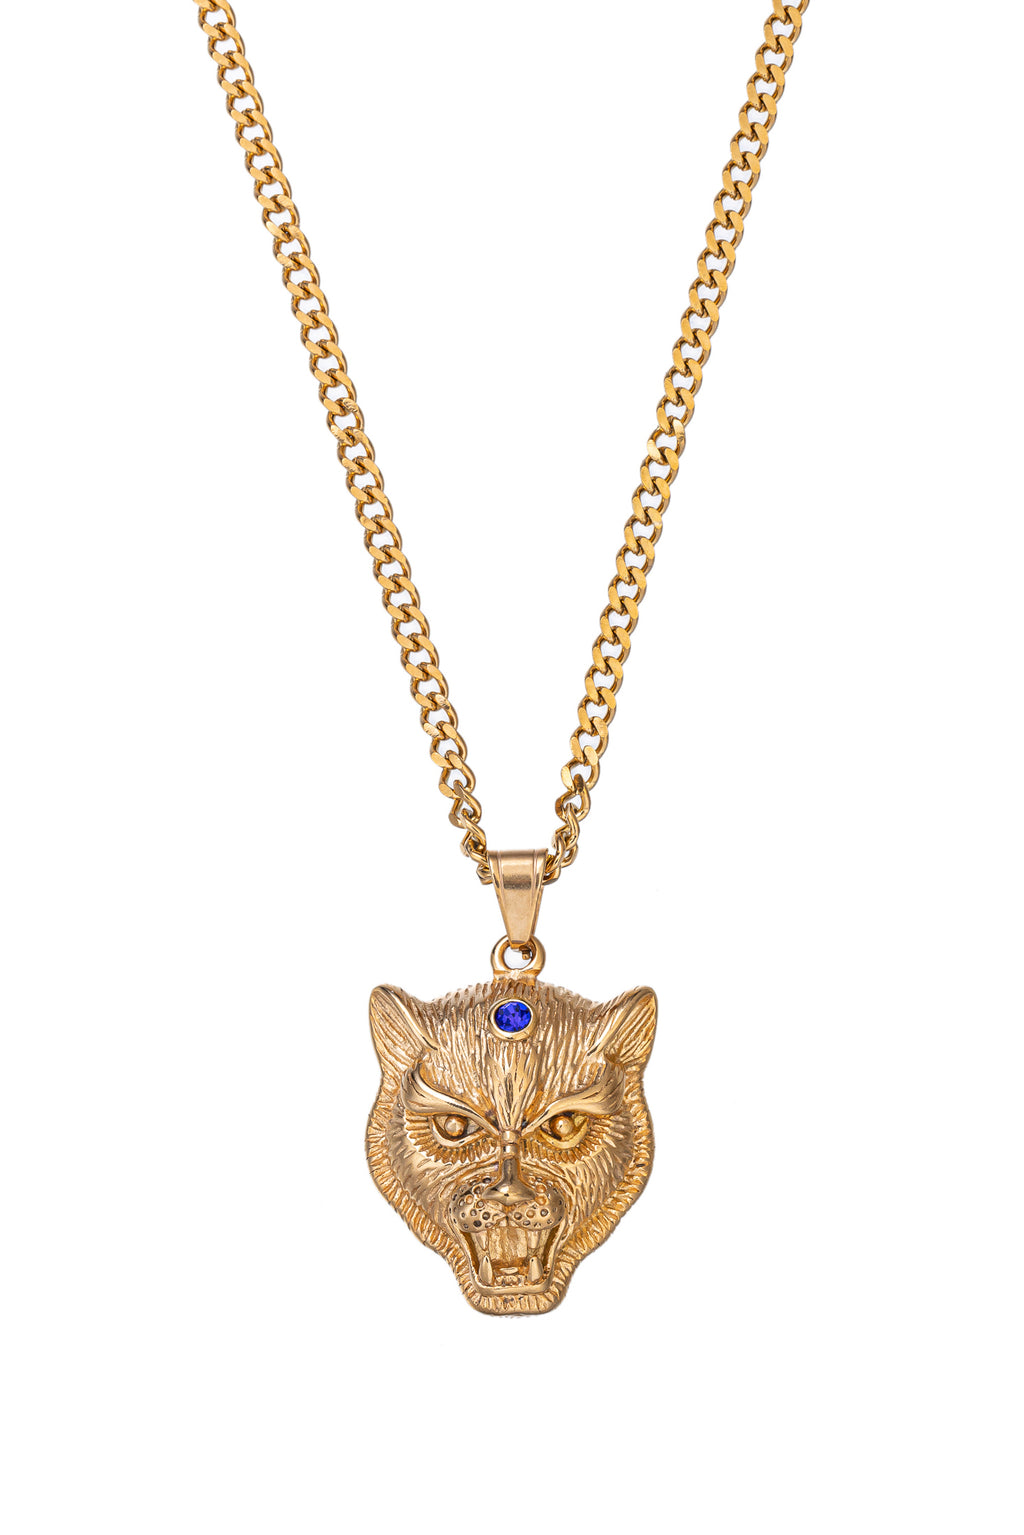 Gold tone titanium cuate pendant necklace with a single blue stone on the forehead.